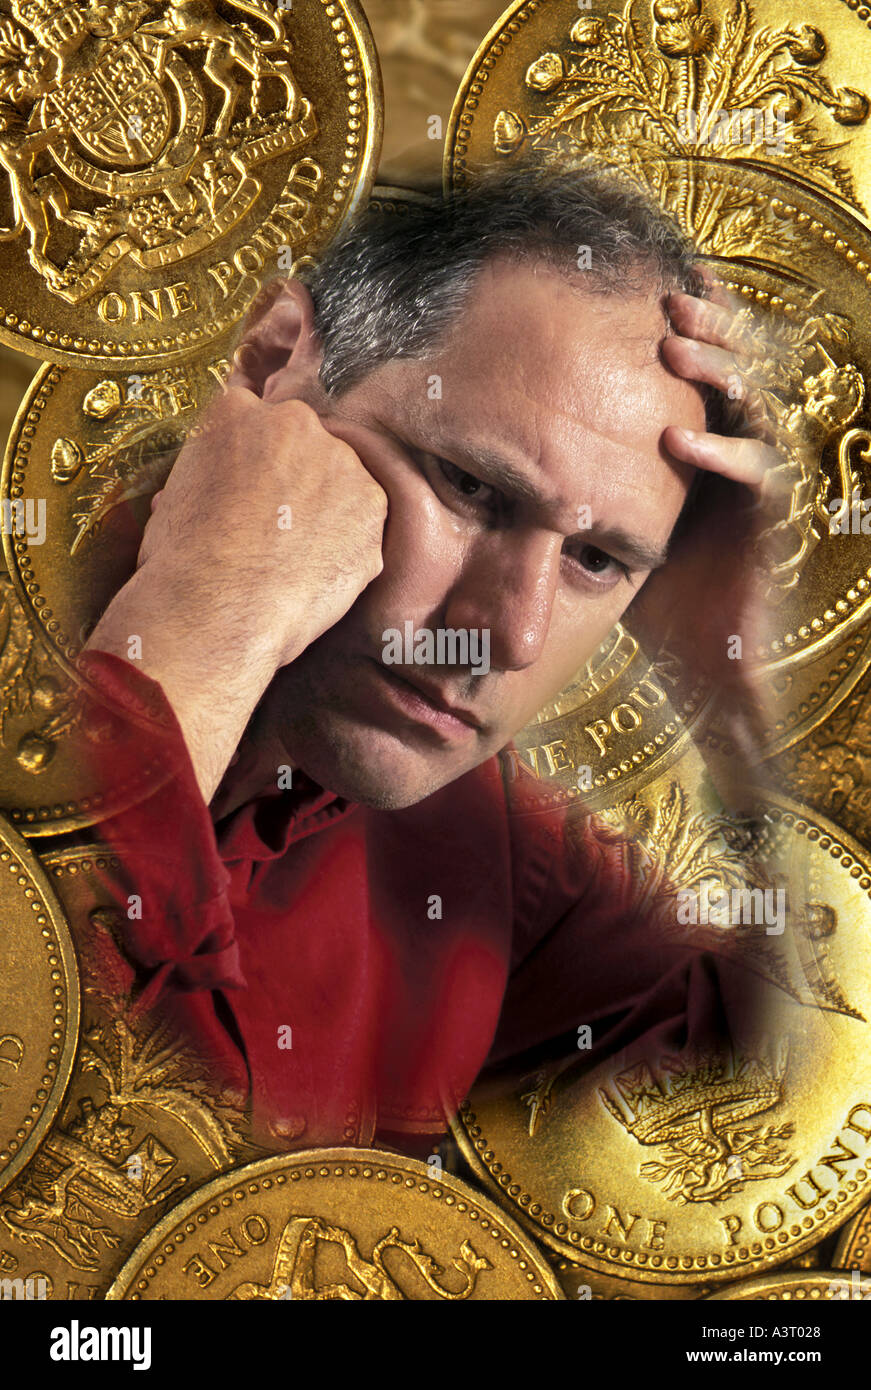 UK Pound coins with man holding head with money problems Stock Photo